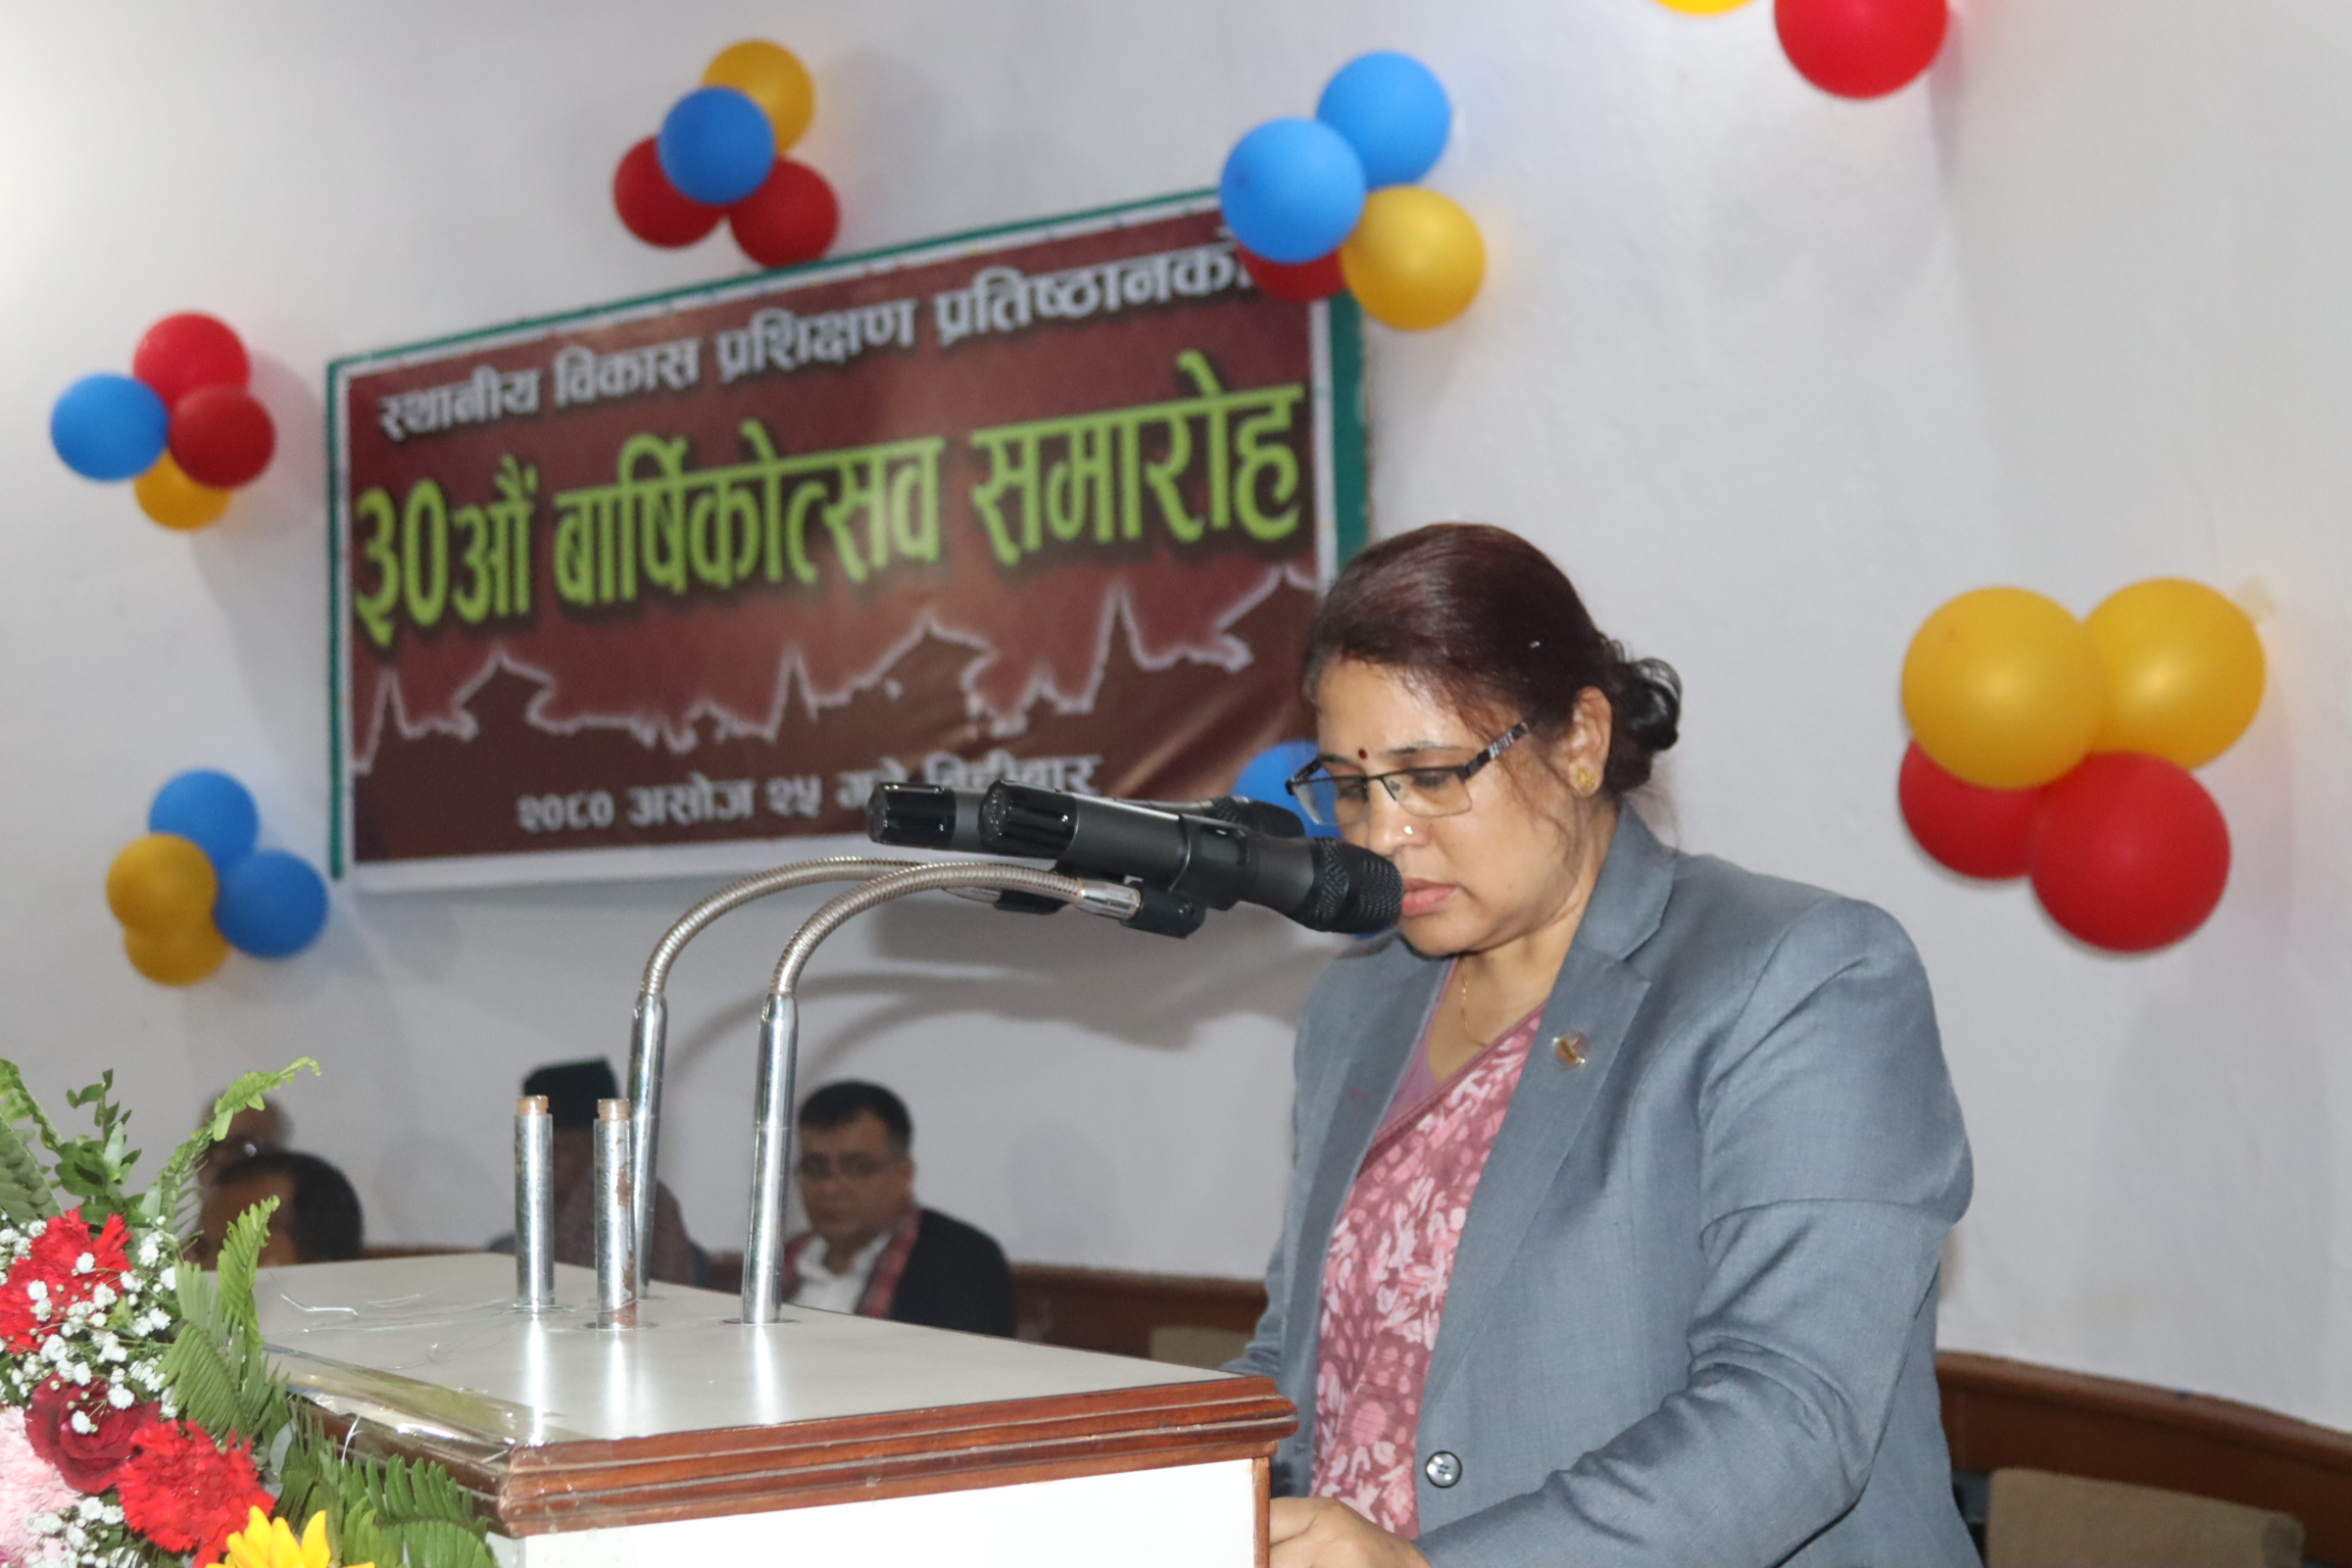 30th anniversary celebrations of Local Development Training Academy held in a grand manner